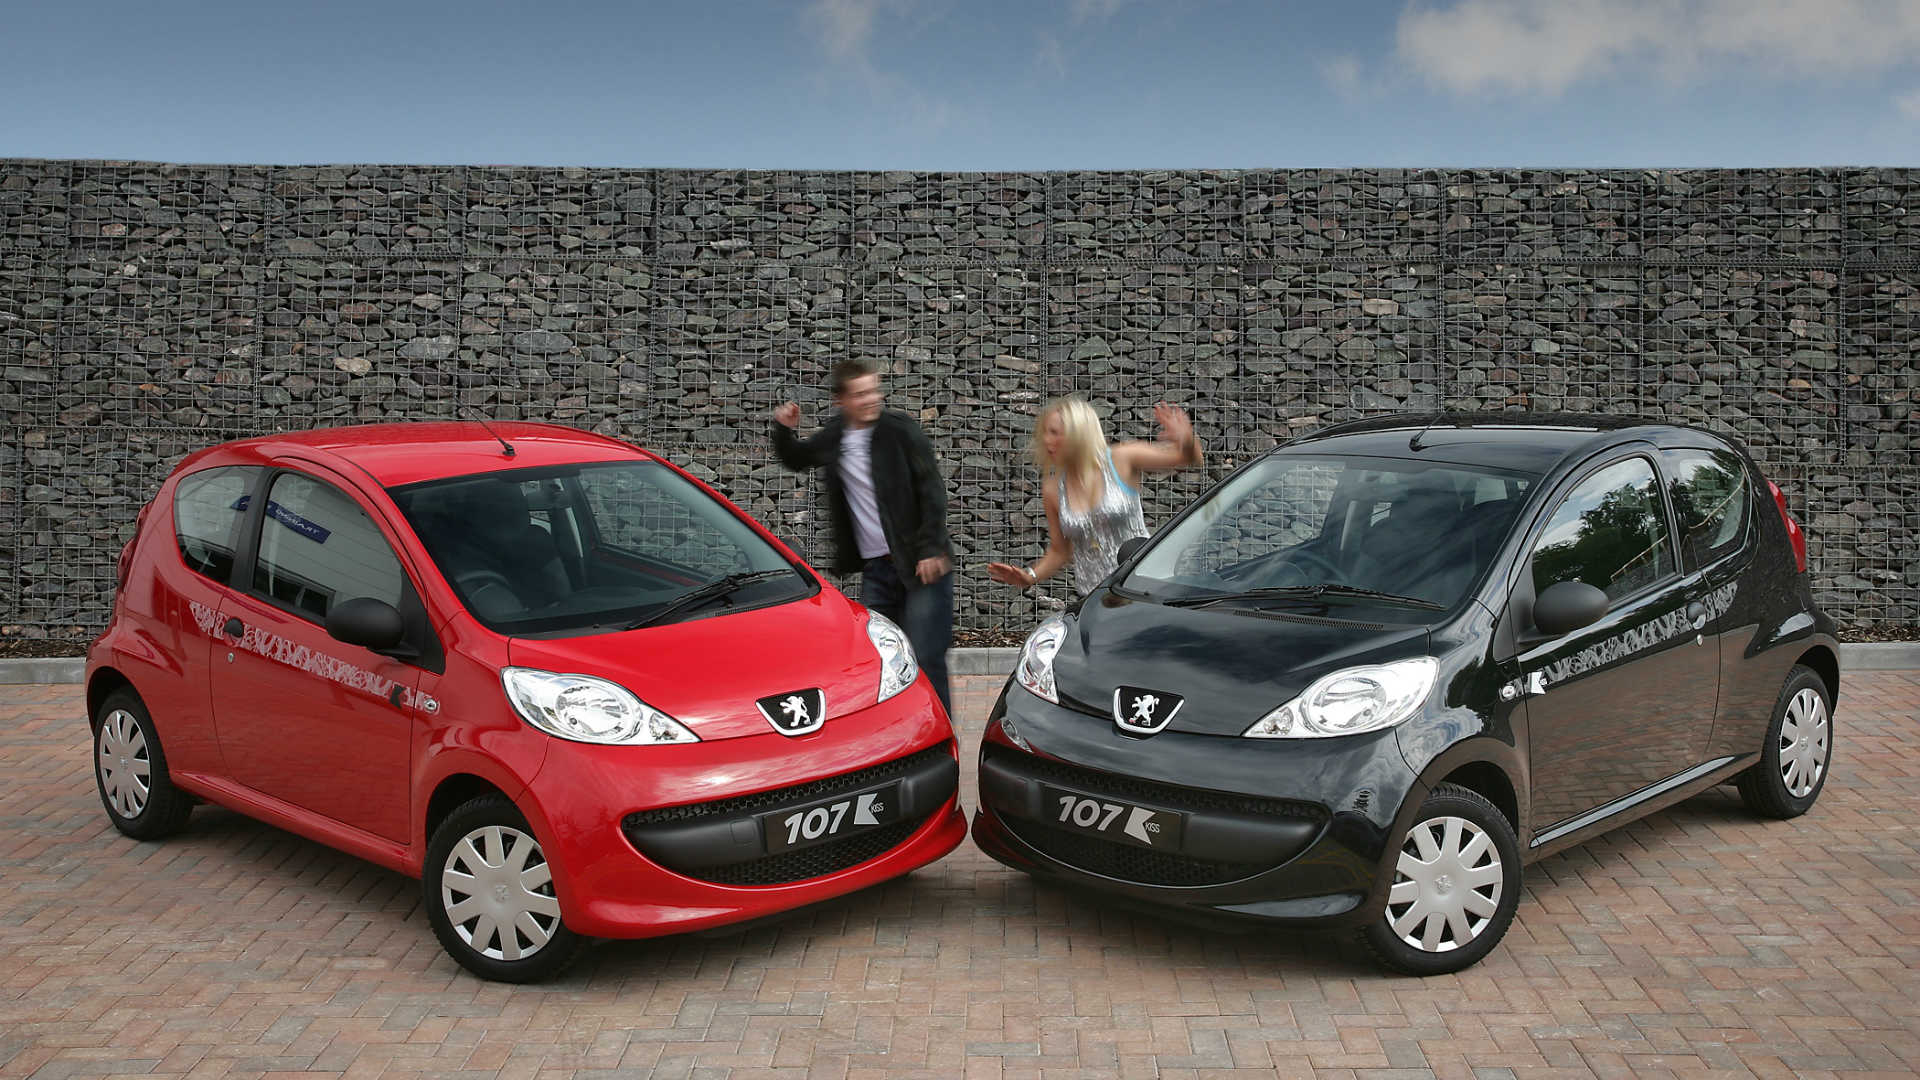 The 10 Cheapest Cars For 17 Year Olds To Insure Motoring for size 1920 X 1080